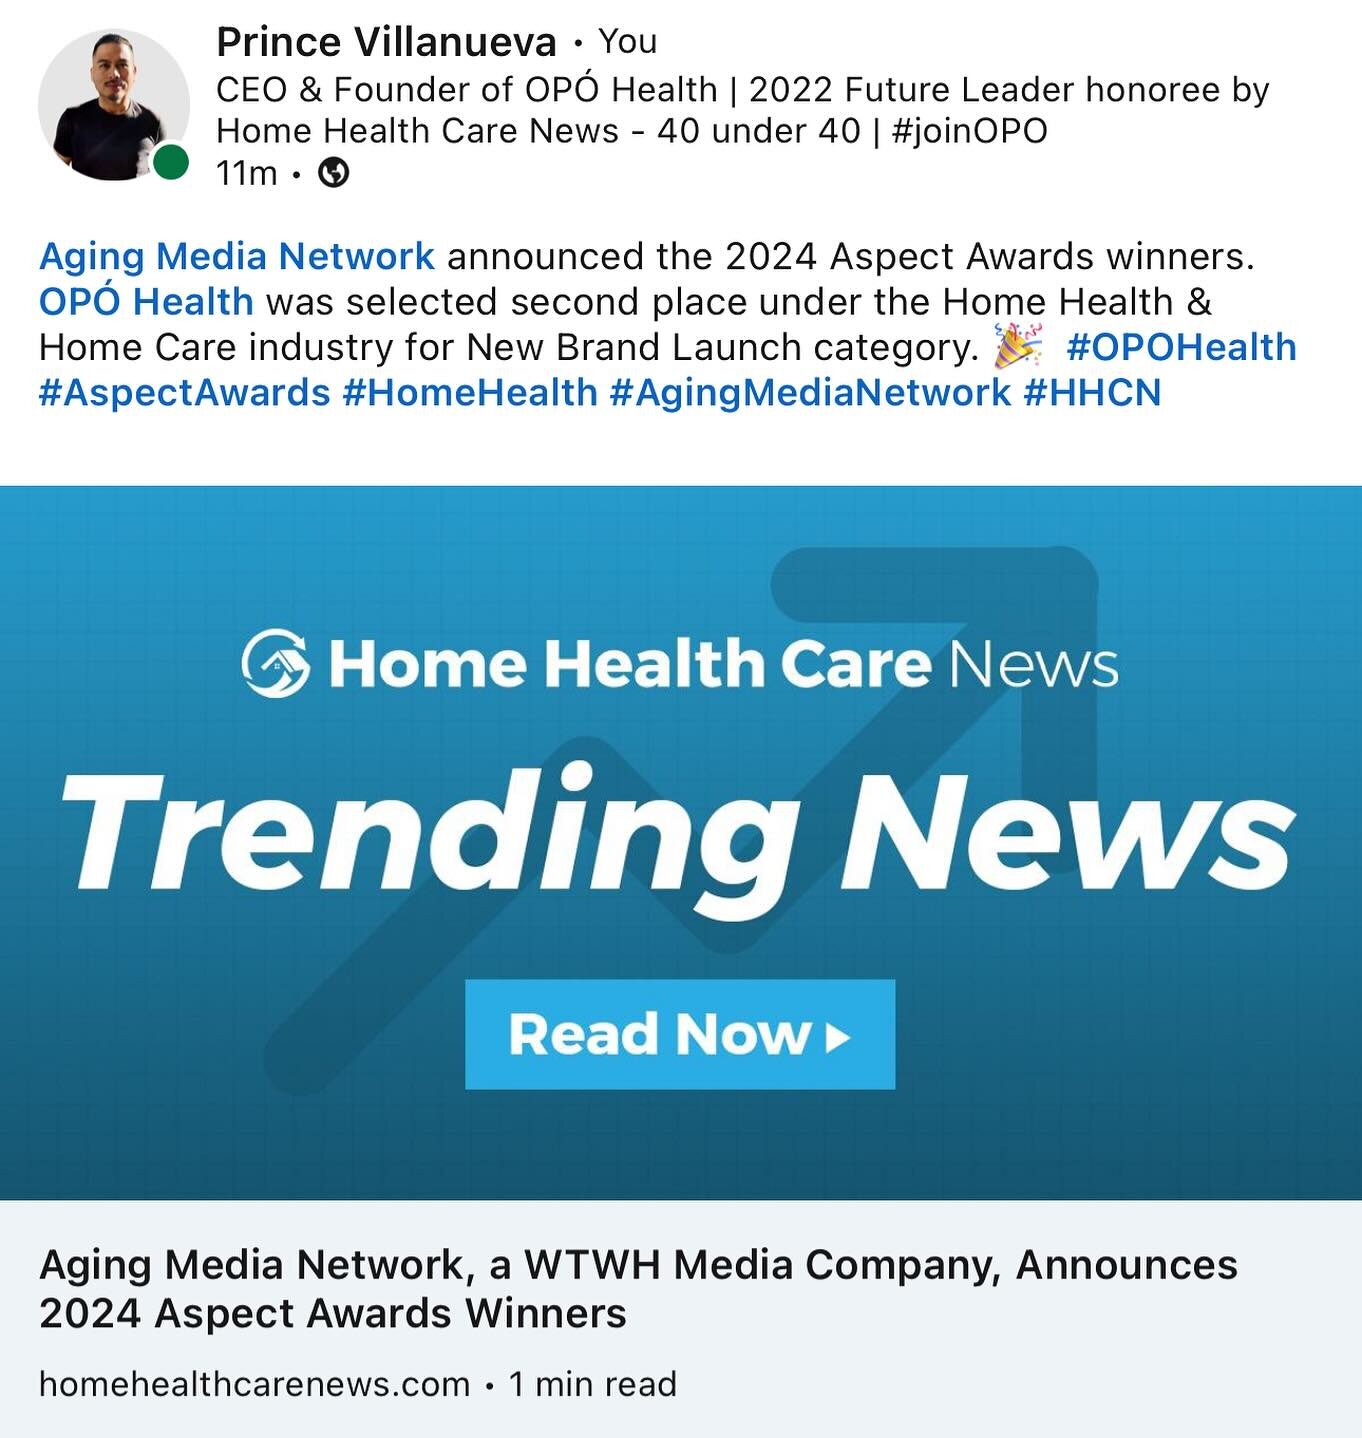 #TrendingNews @opohealth was selected second for New Brand Launch category by Aging Media Network. 🎉#AspectAward #HHCN #HomeHealth